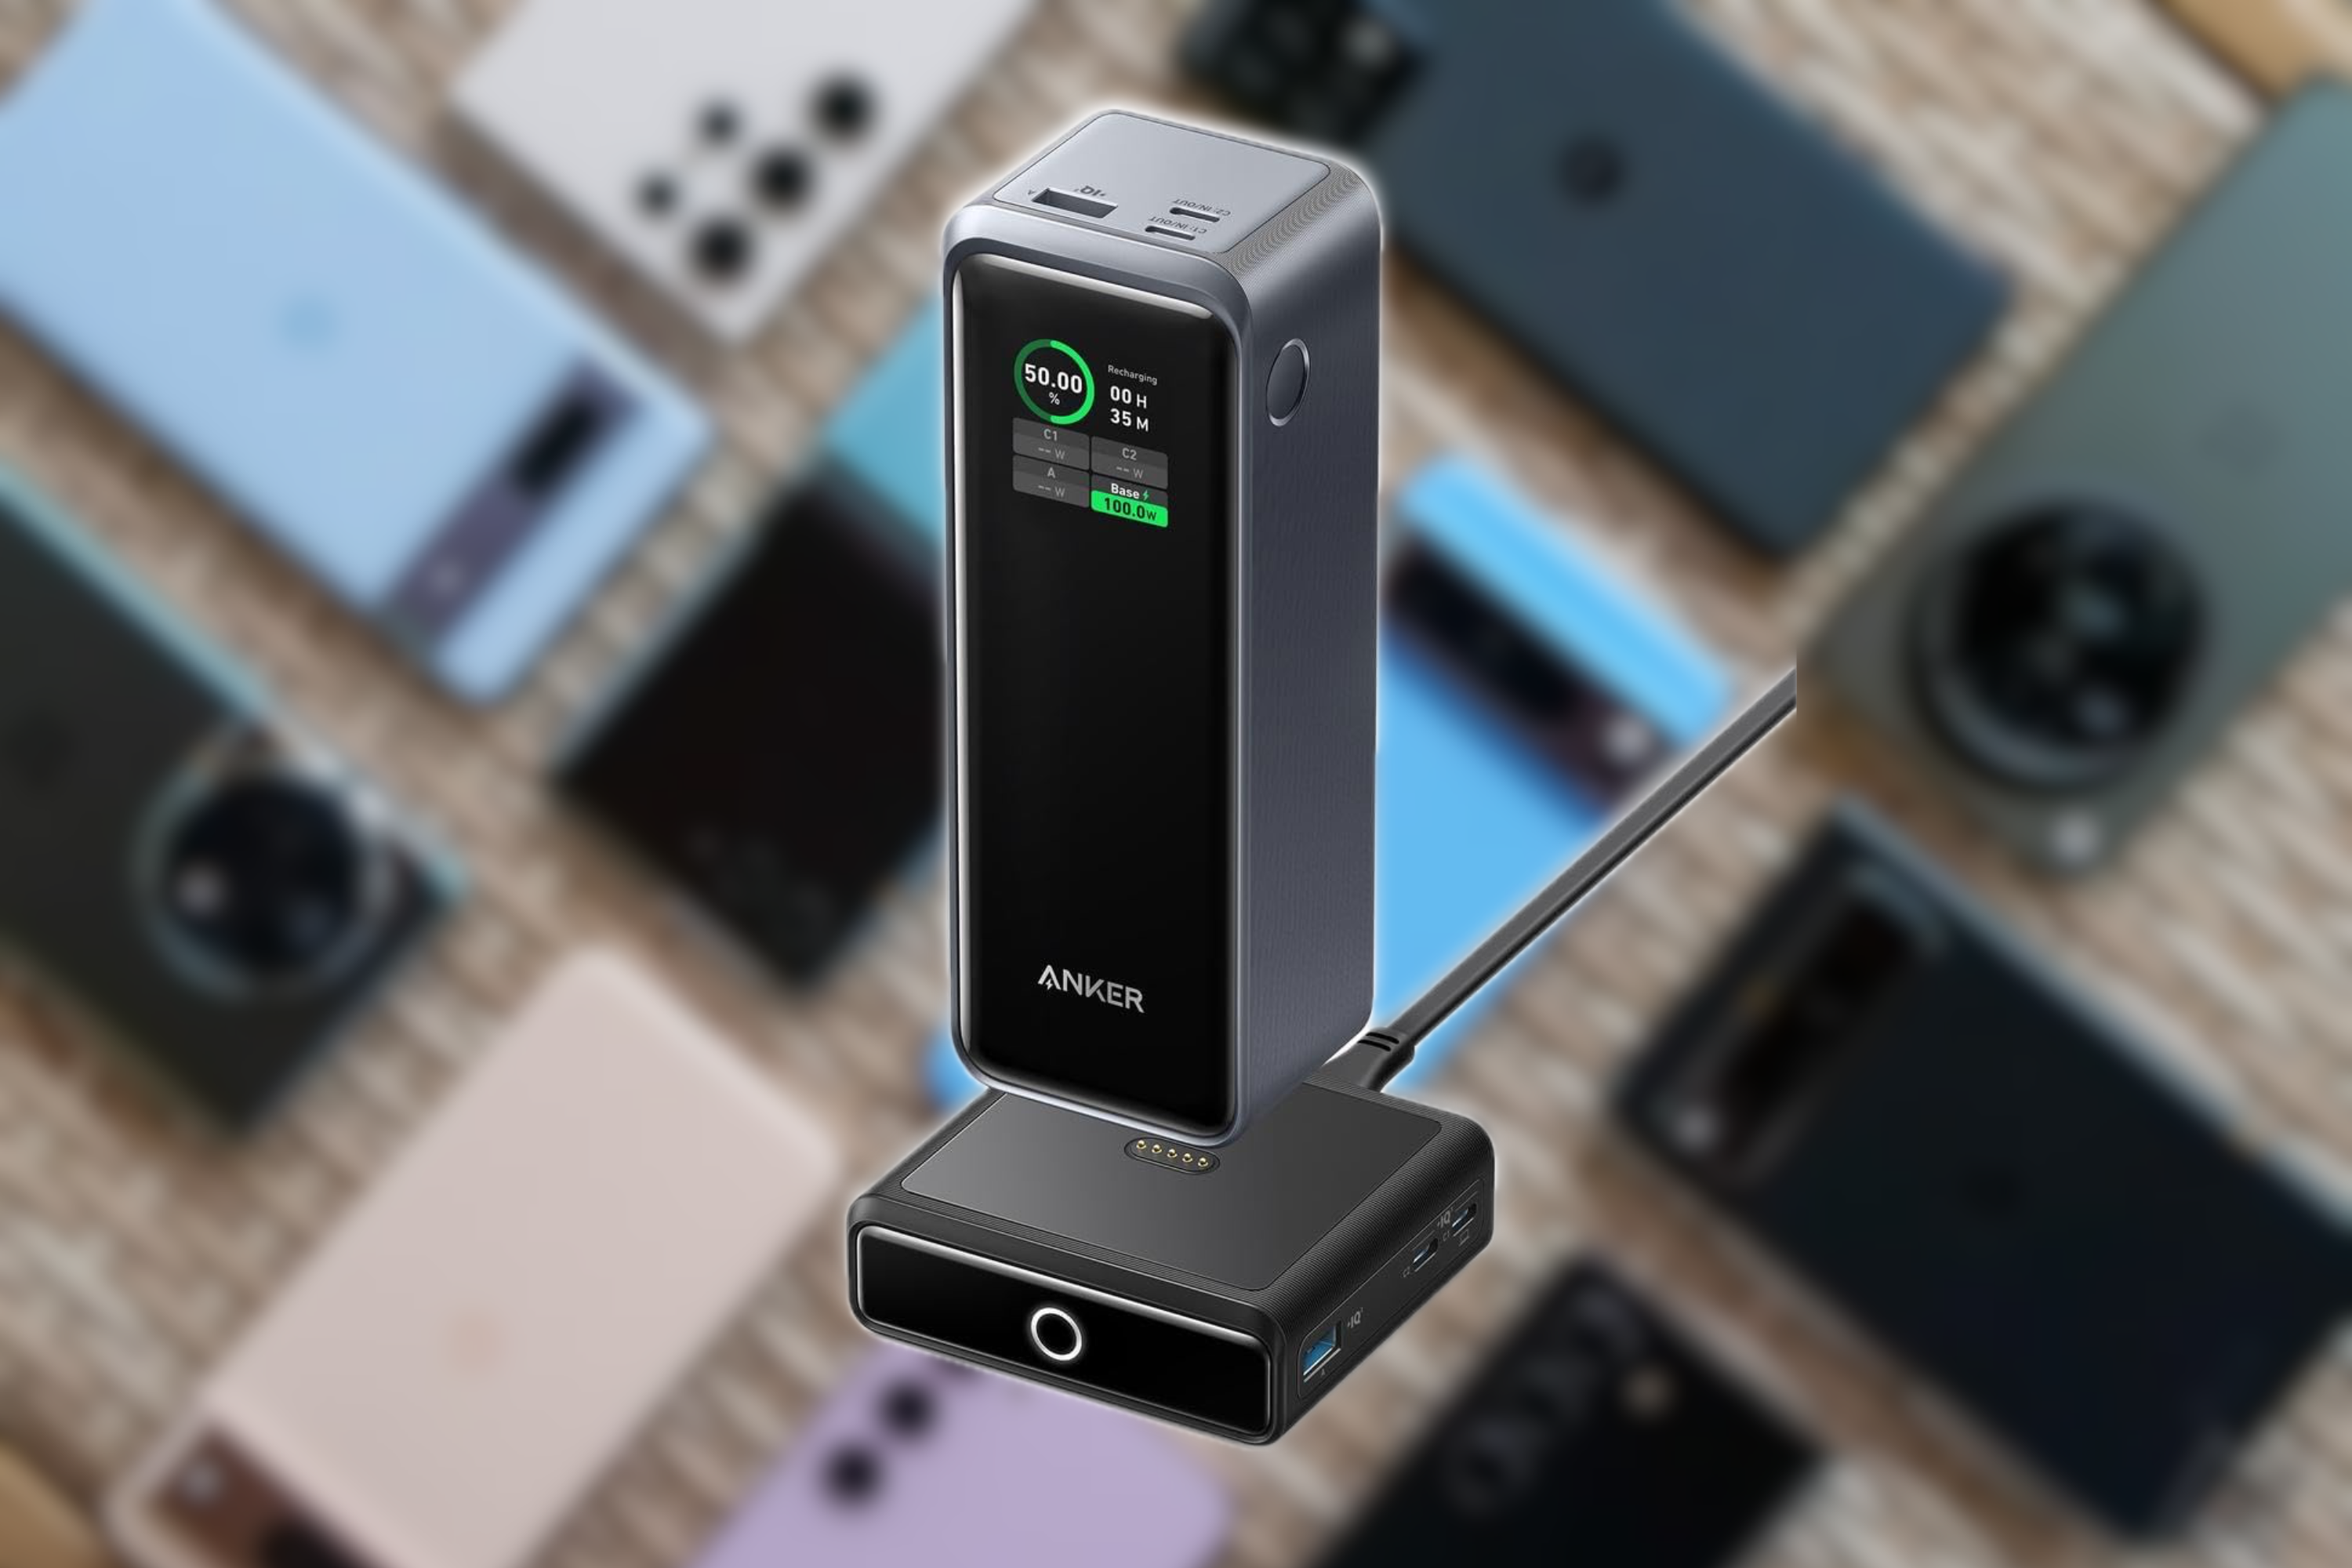 Anker's massive power bank and 100W wireless charger gets steep 30% discount in unheard of deal - Android Police